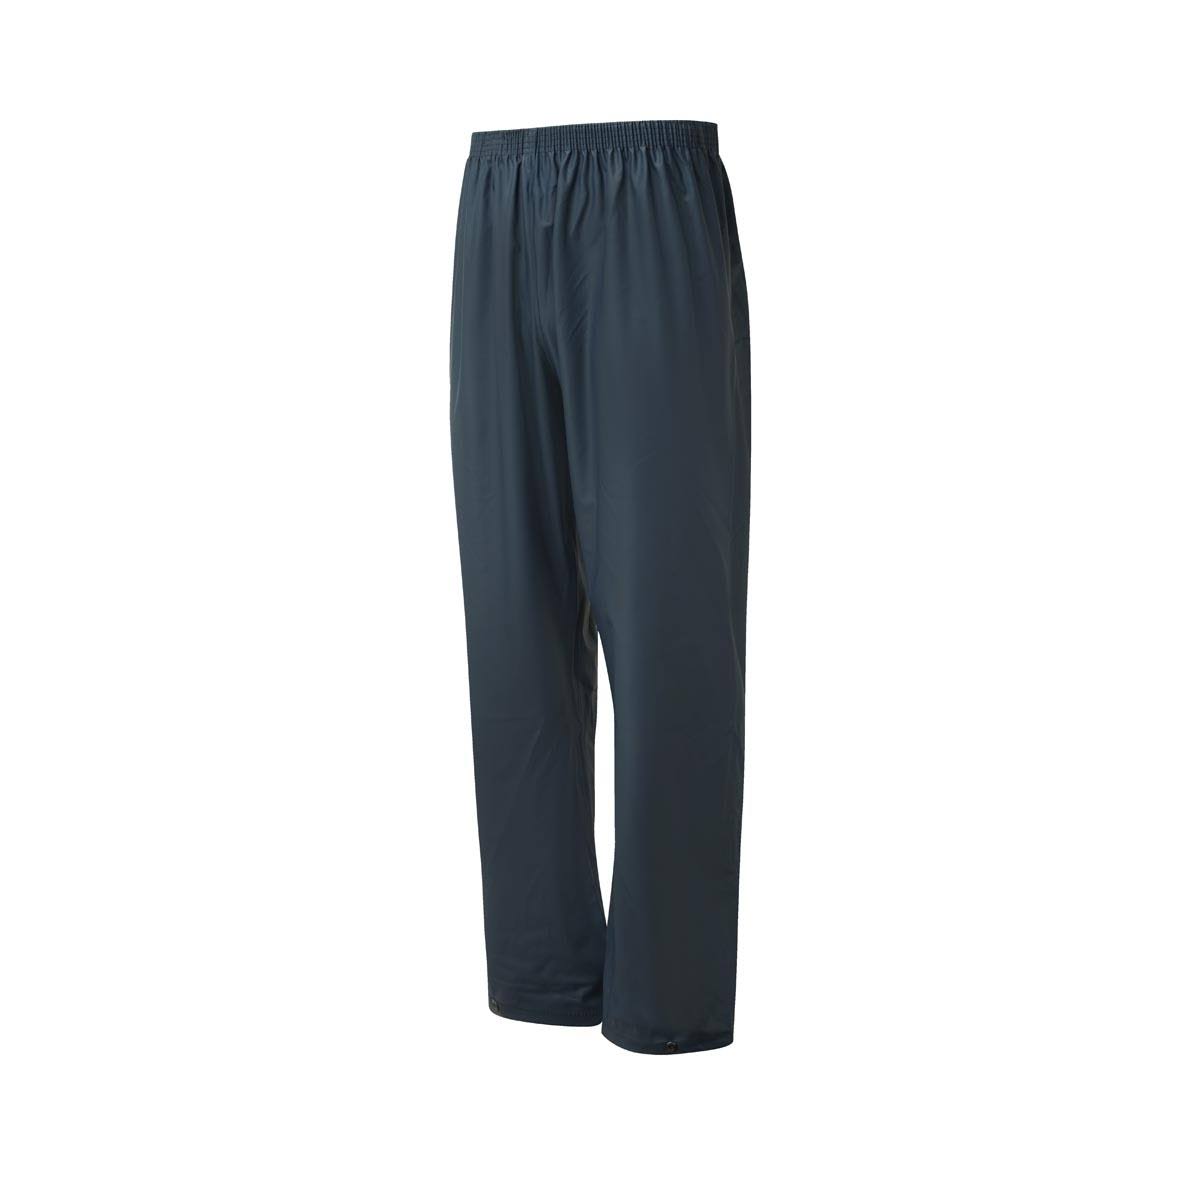 Fort 921-NVY-XL 921 Airflex Trouser Navy Blue - XL | By Toolden